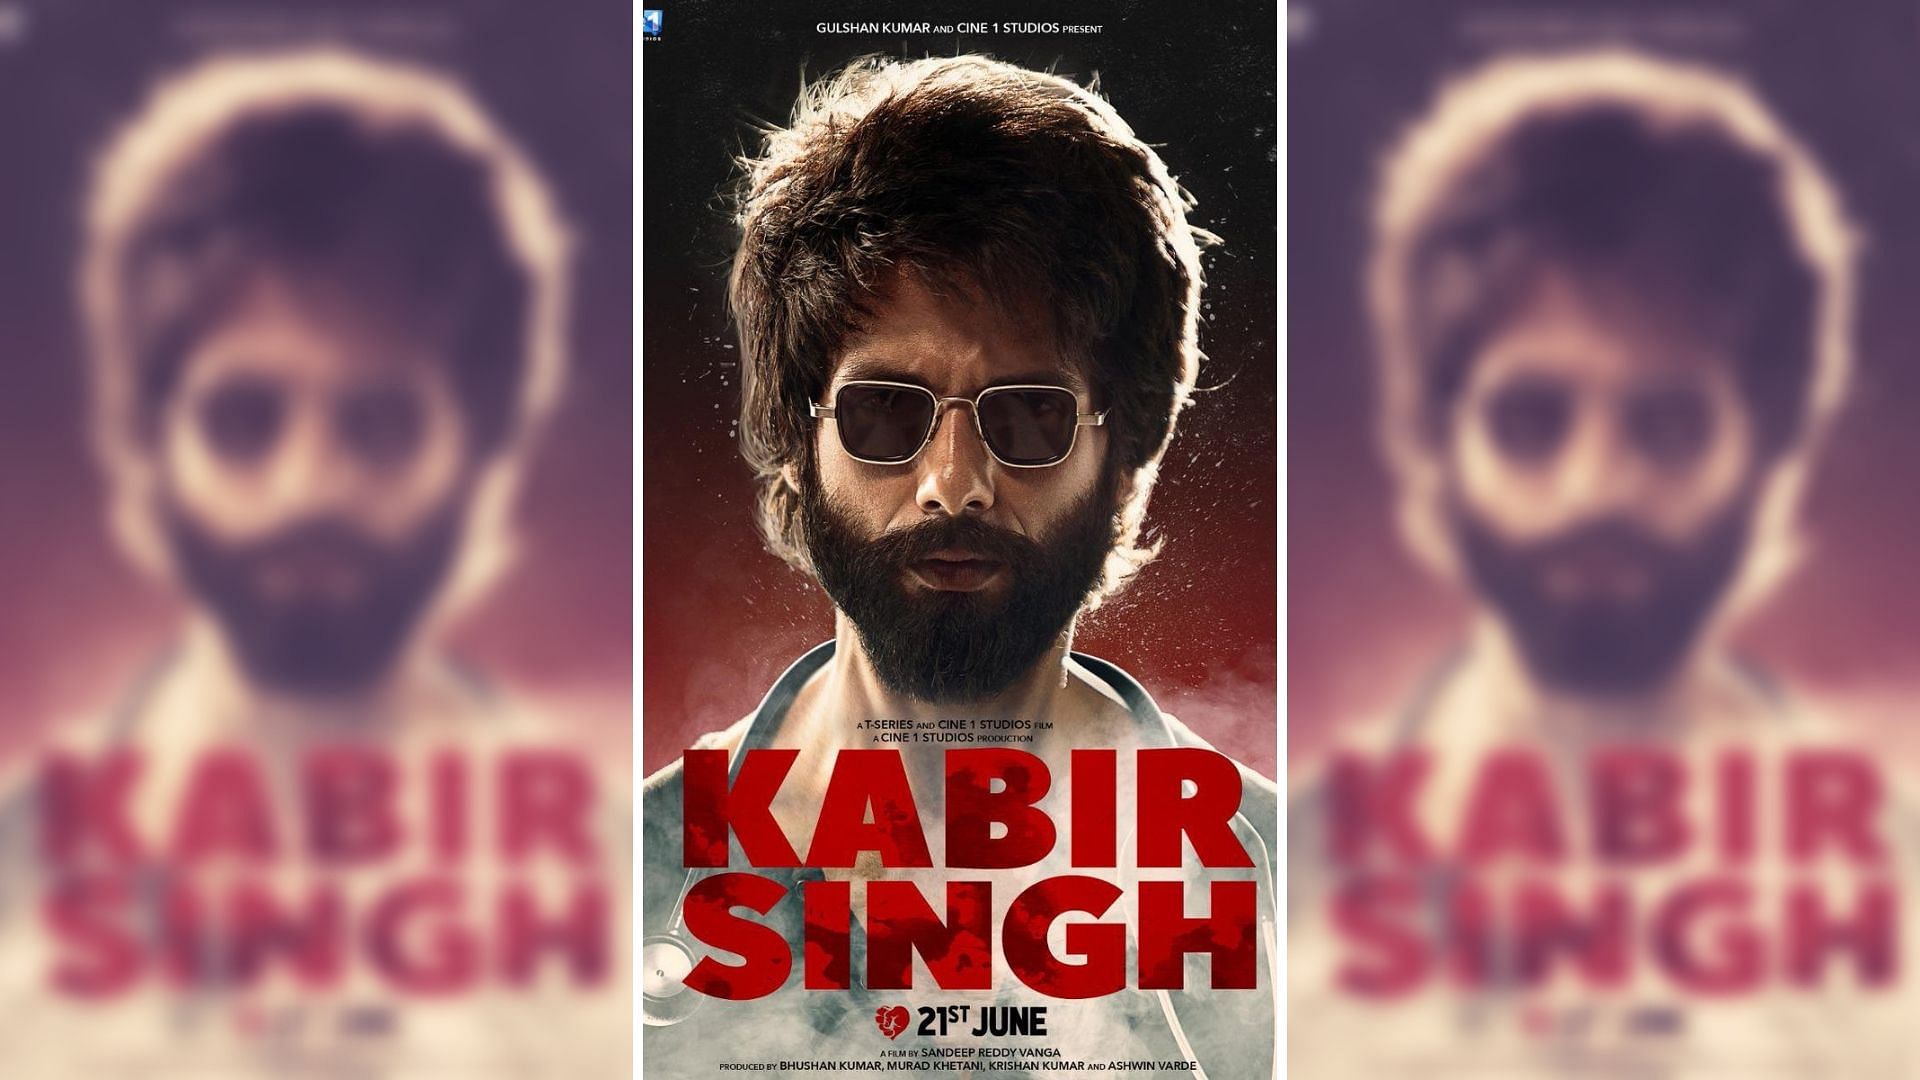 Shahid Kapoor in a poster for <i>Kabir Singh</i>.